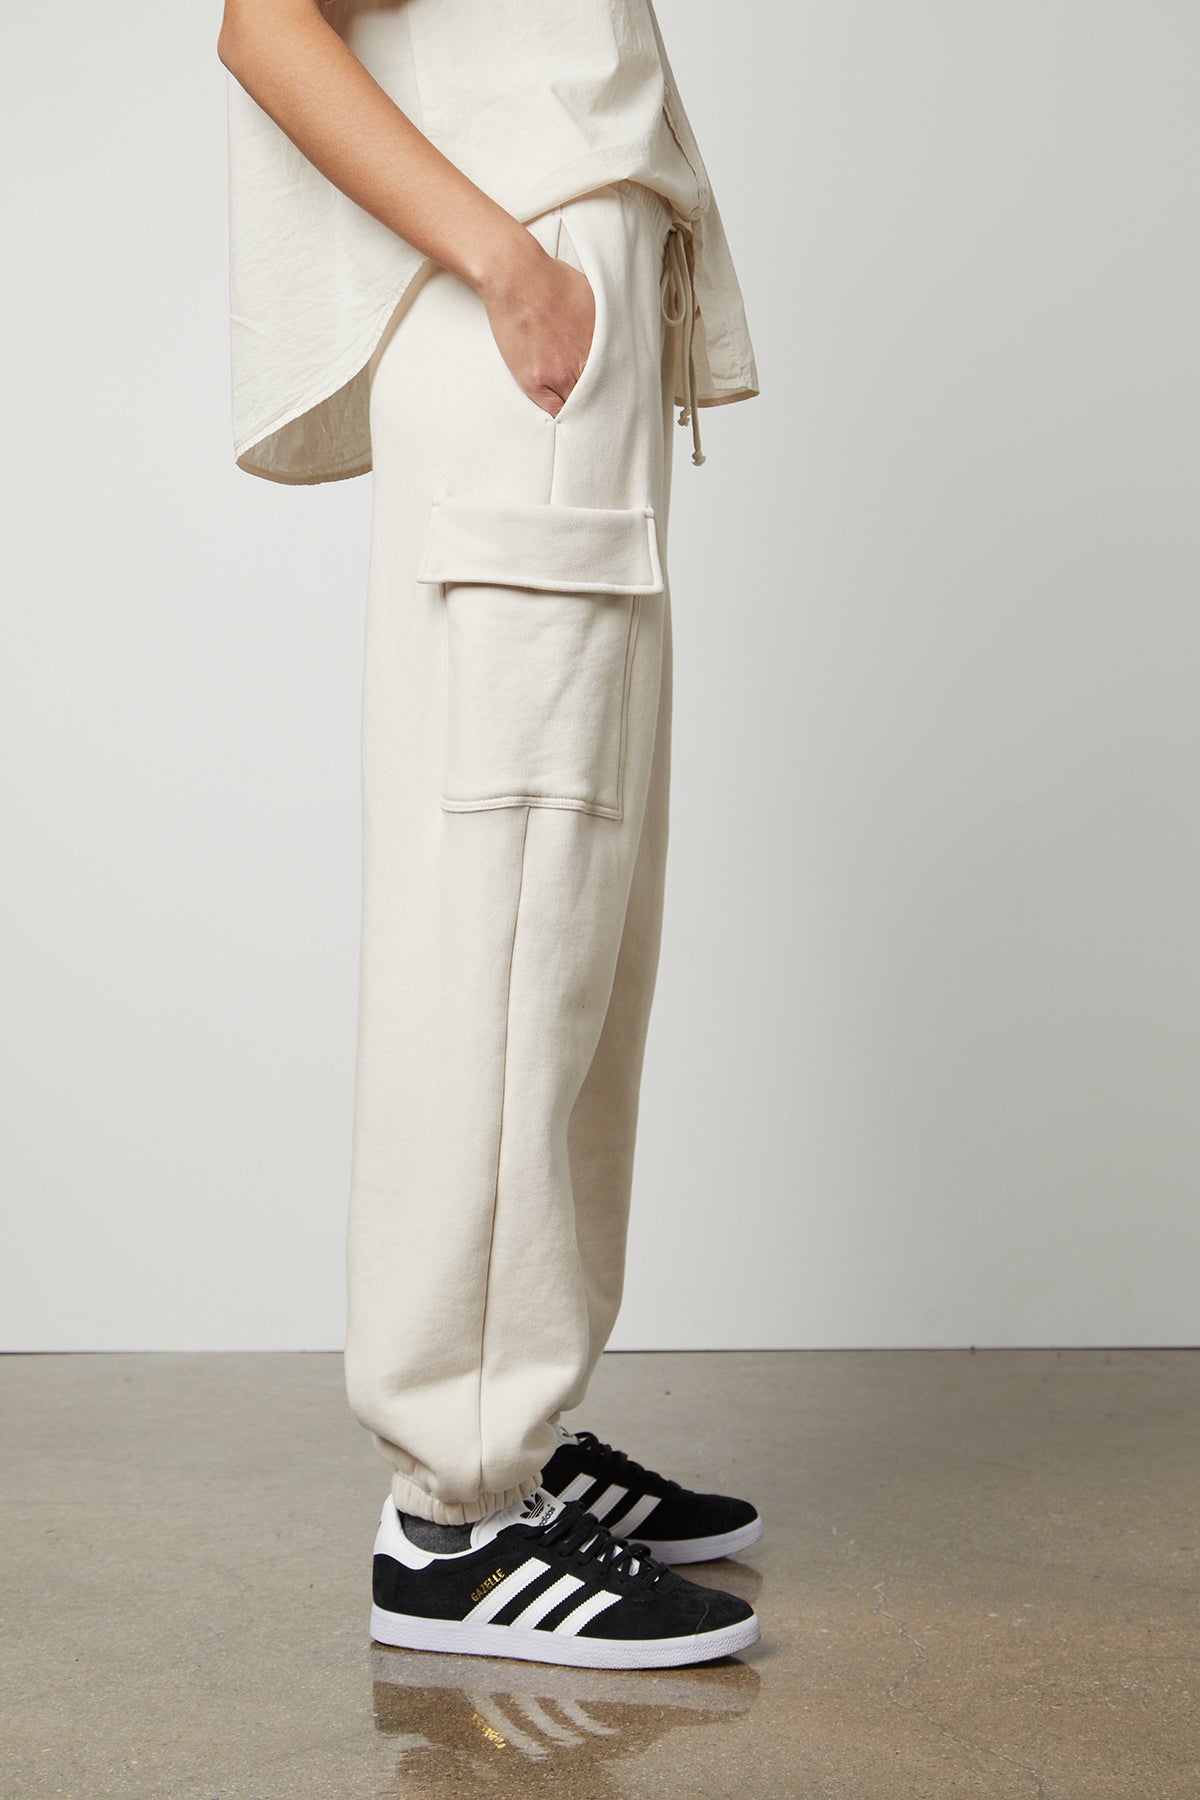   The model is wearing a white LUMI DRAWSTRING WAIST SWEATPANT and black sneakers. 